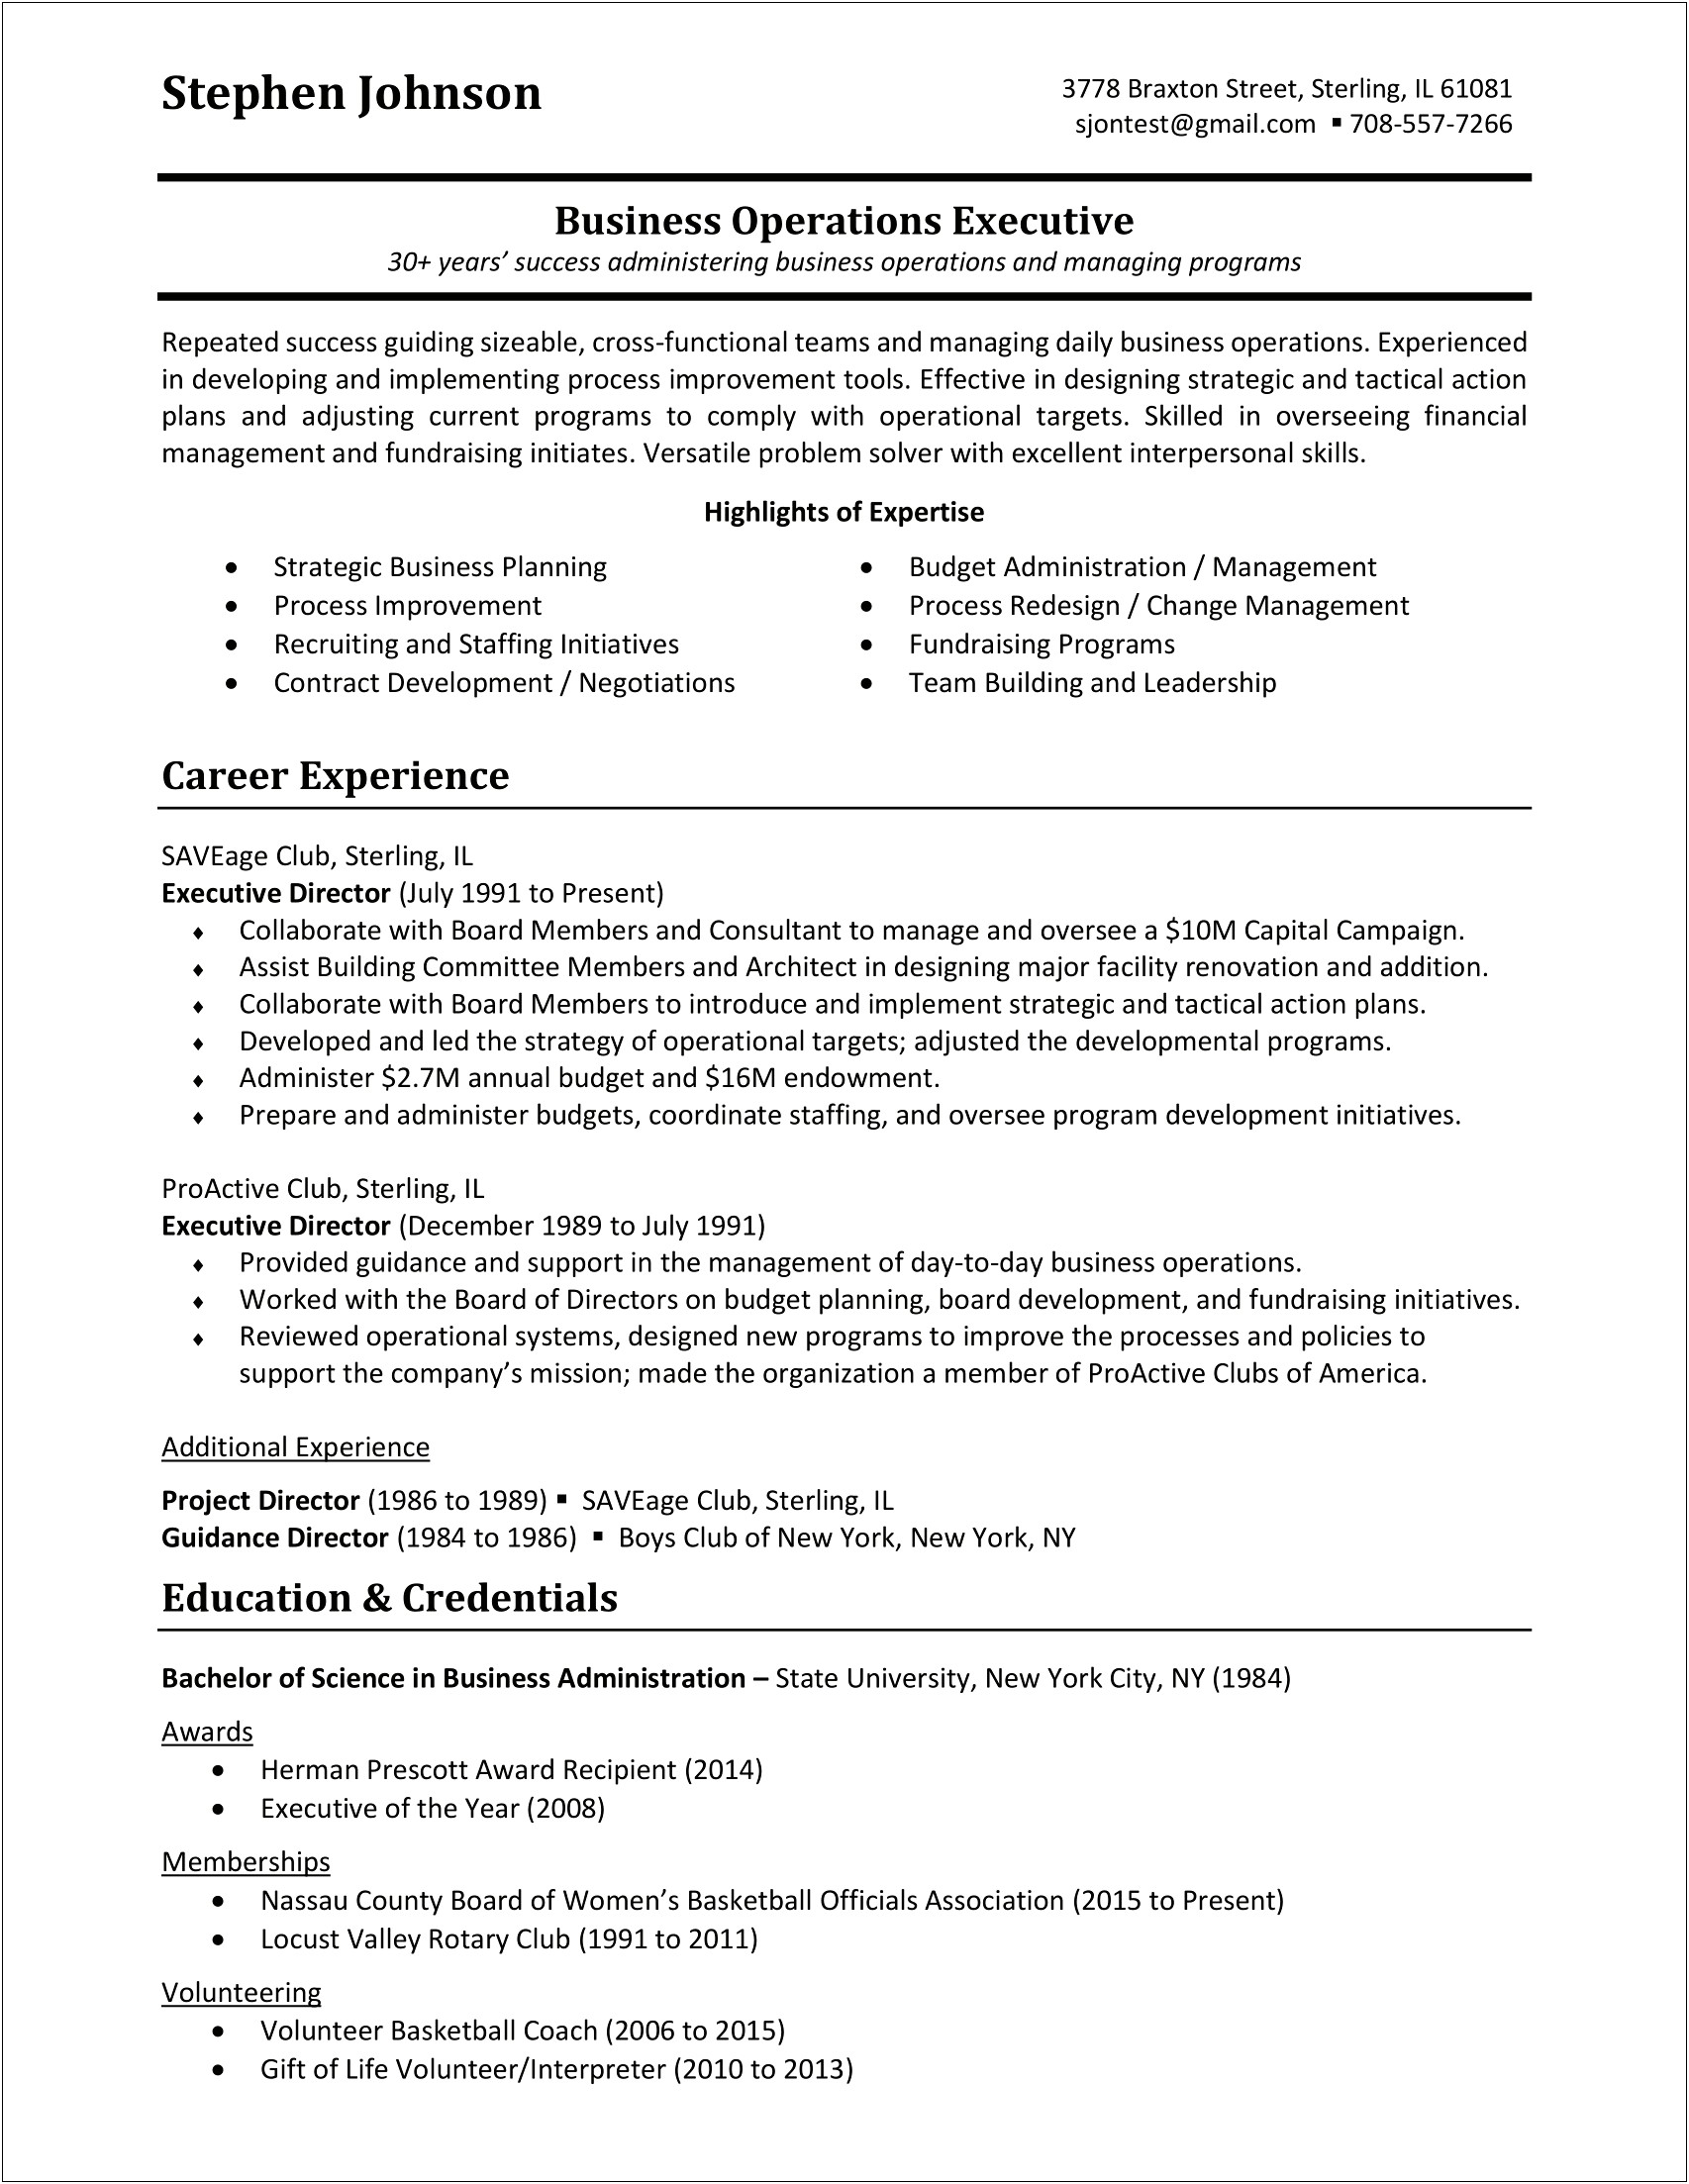 Best Affordable Resume Writers Near Me